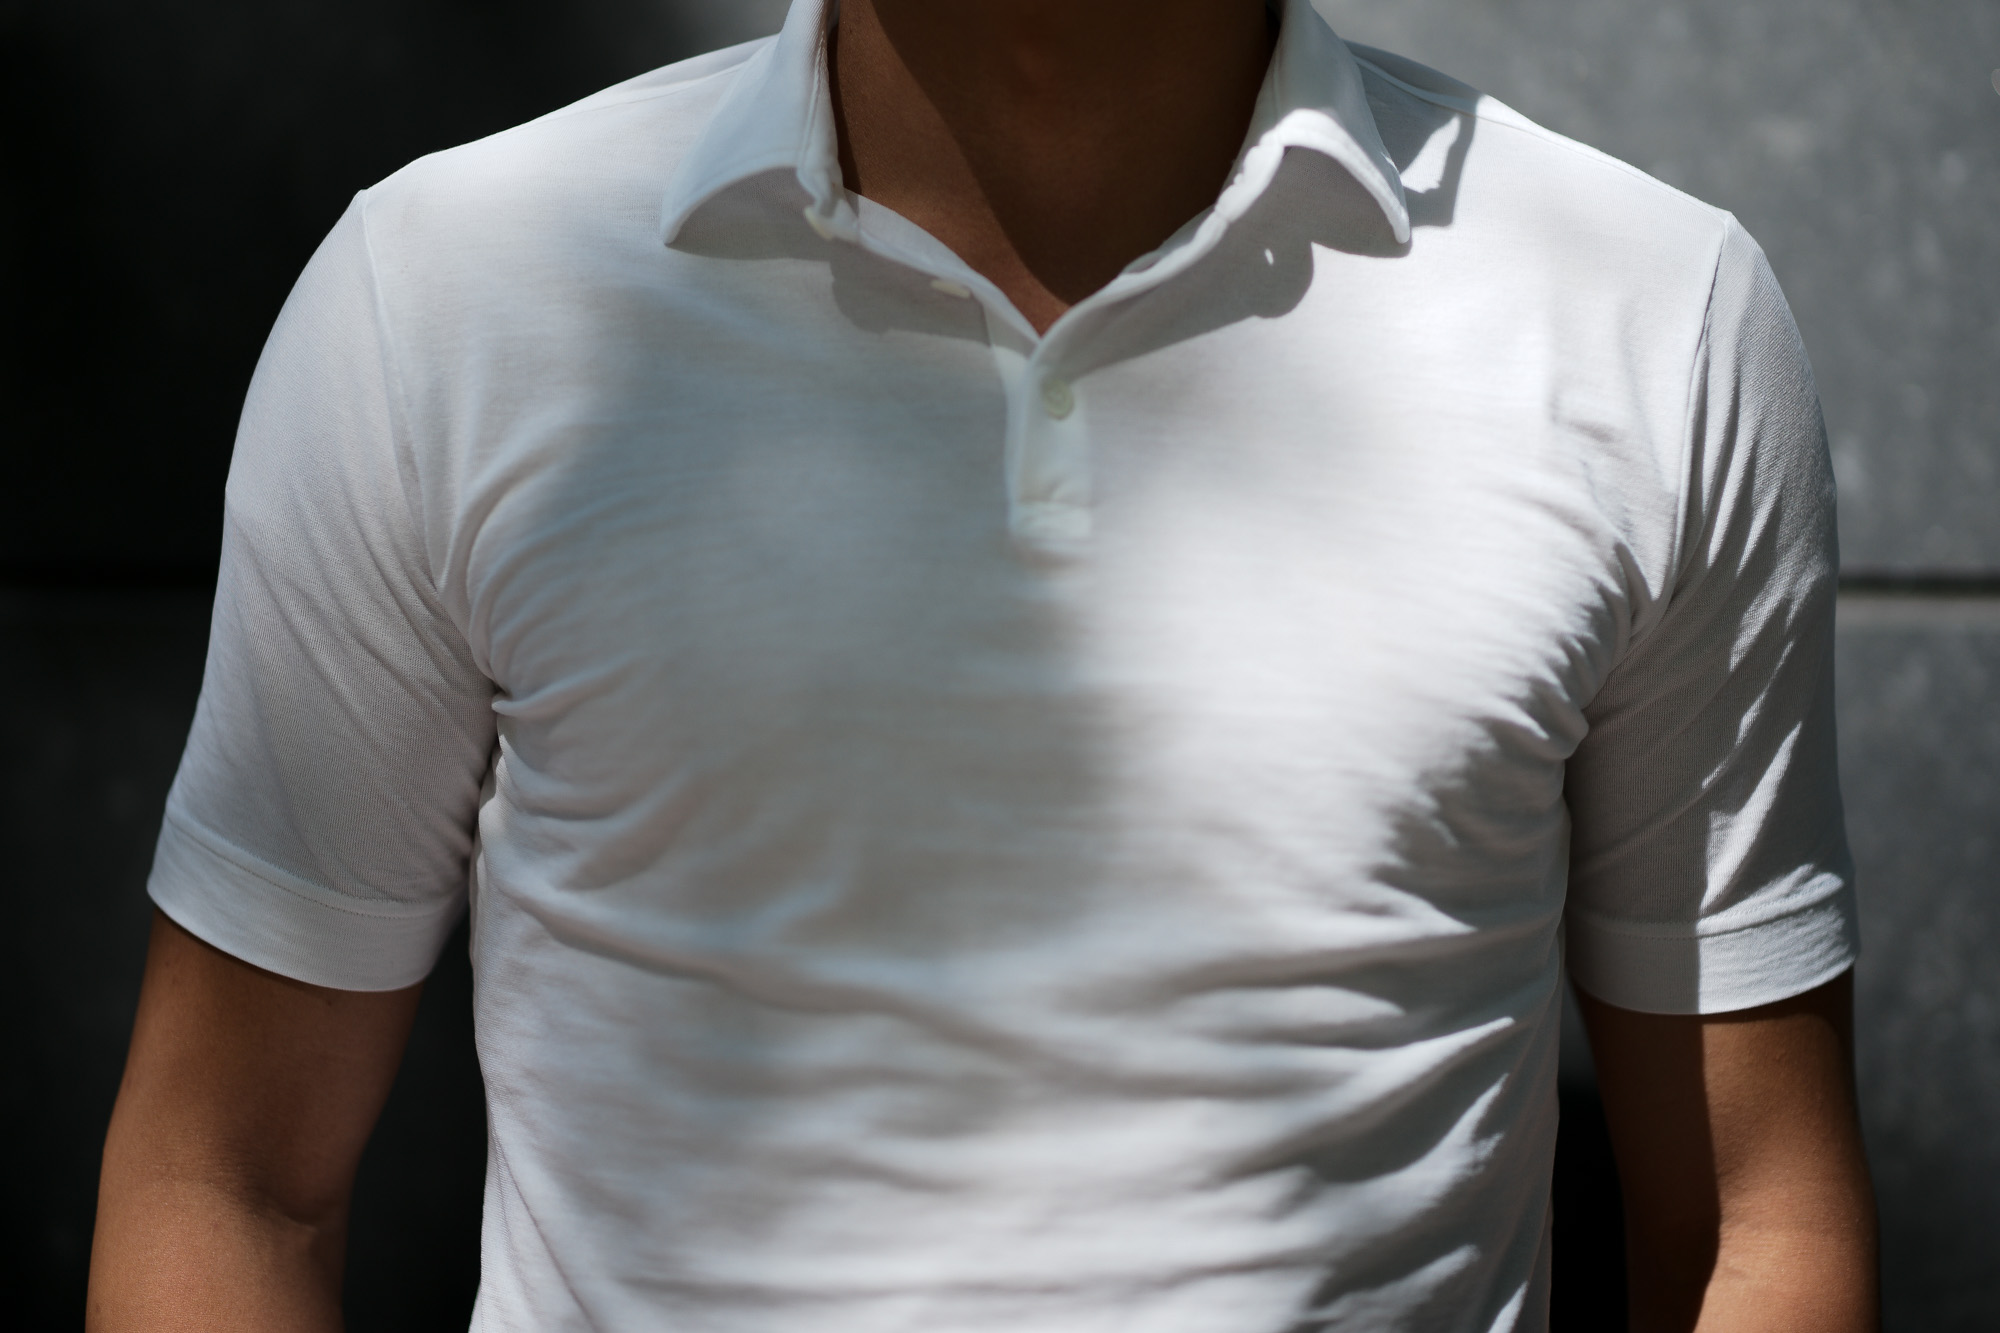 ZANONE(ザノーネ) Polo Shirt ice cotton アイスコットン ポロシャツ WHITE (ホワイト・Z0001)  made in italy (イタリア製) 2019 春夏新作 愛知 名古屋 altoediritto アルトエデリット